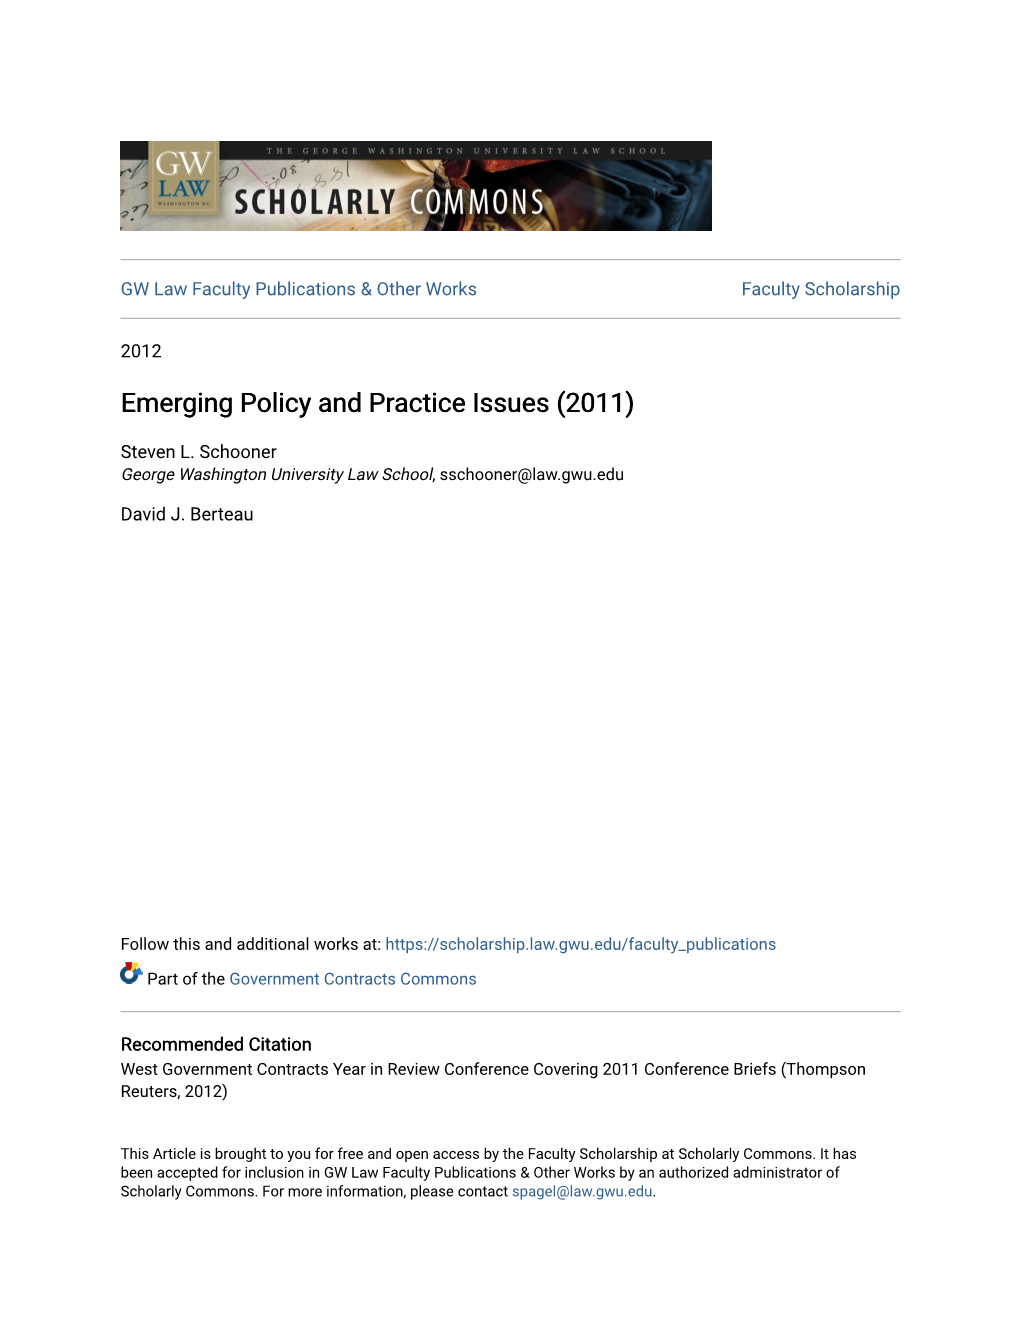 Emerging Policy and Practice Issues (2011)